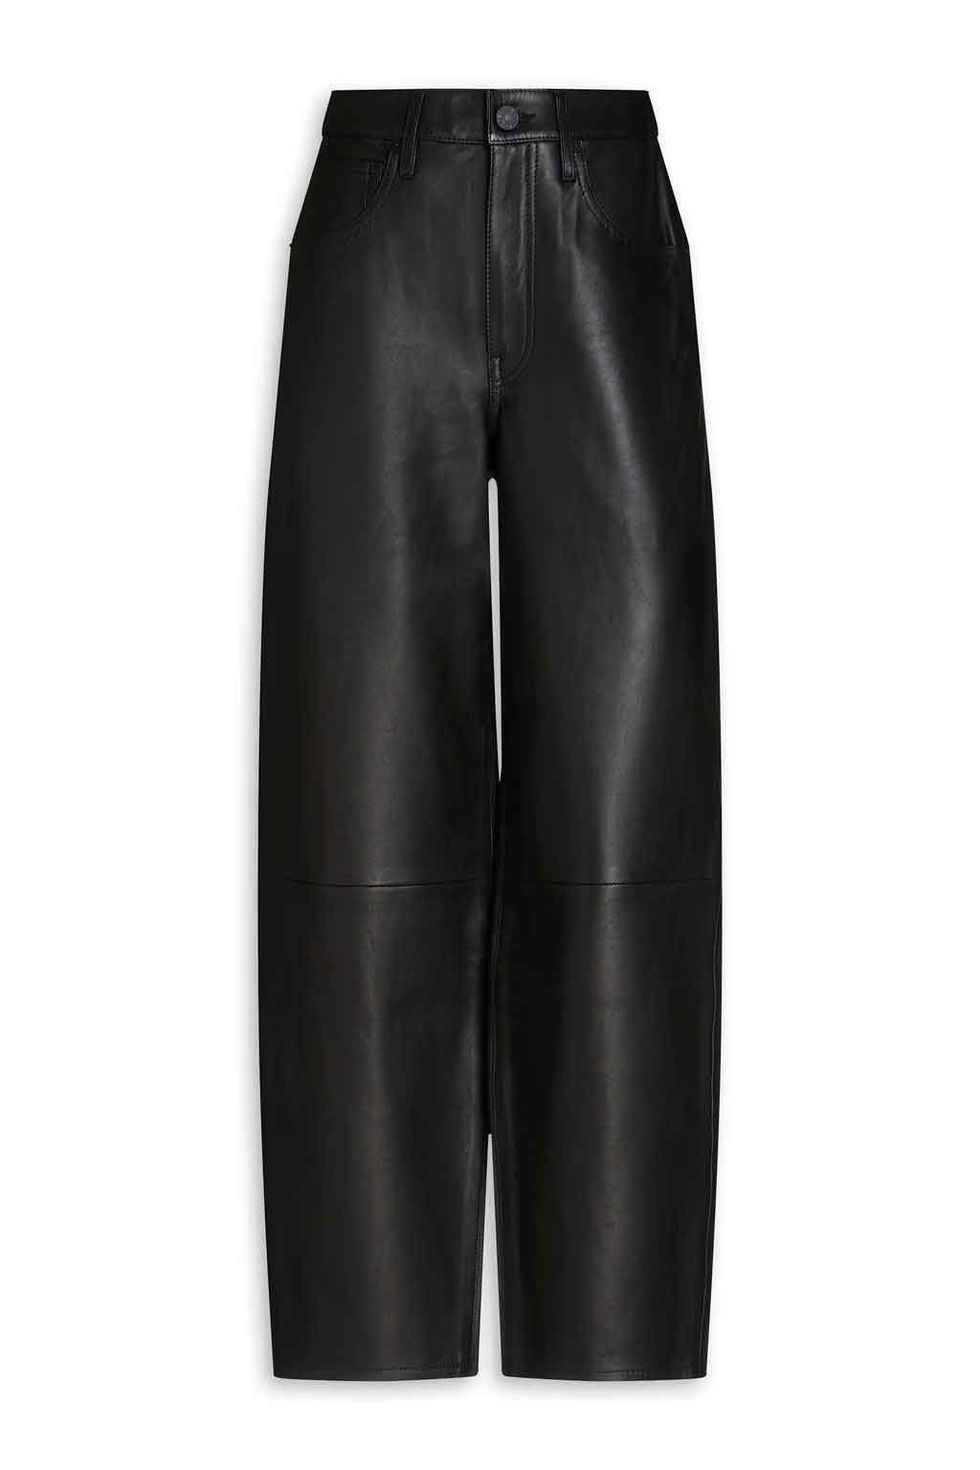 Black Leather Pants For Women An Ultimate Guide 2023 - Street